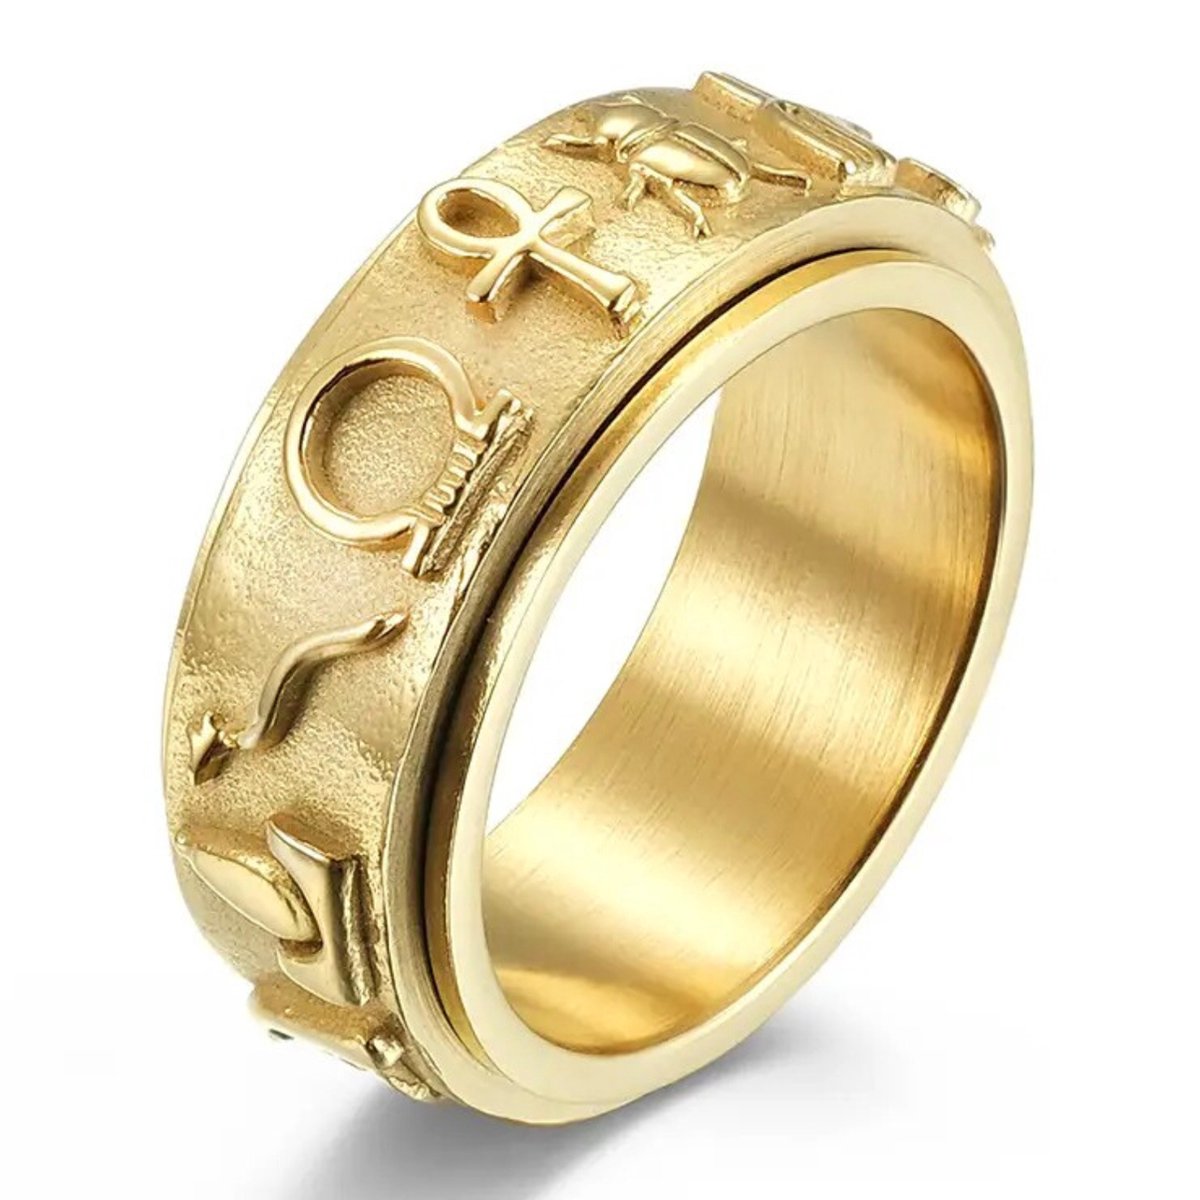 Anxiety Ring - (Egypte) - Stress Ring - Fidget Ring - Anxiety Ring For Finger - Draaibare Ring - Spinning Ring - Goud - (21.25 mm / maat 67)